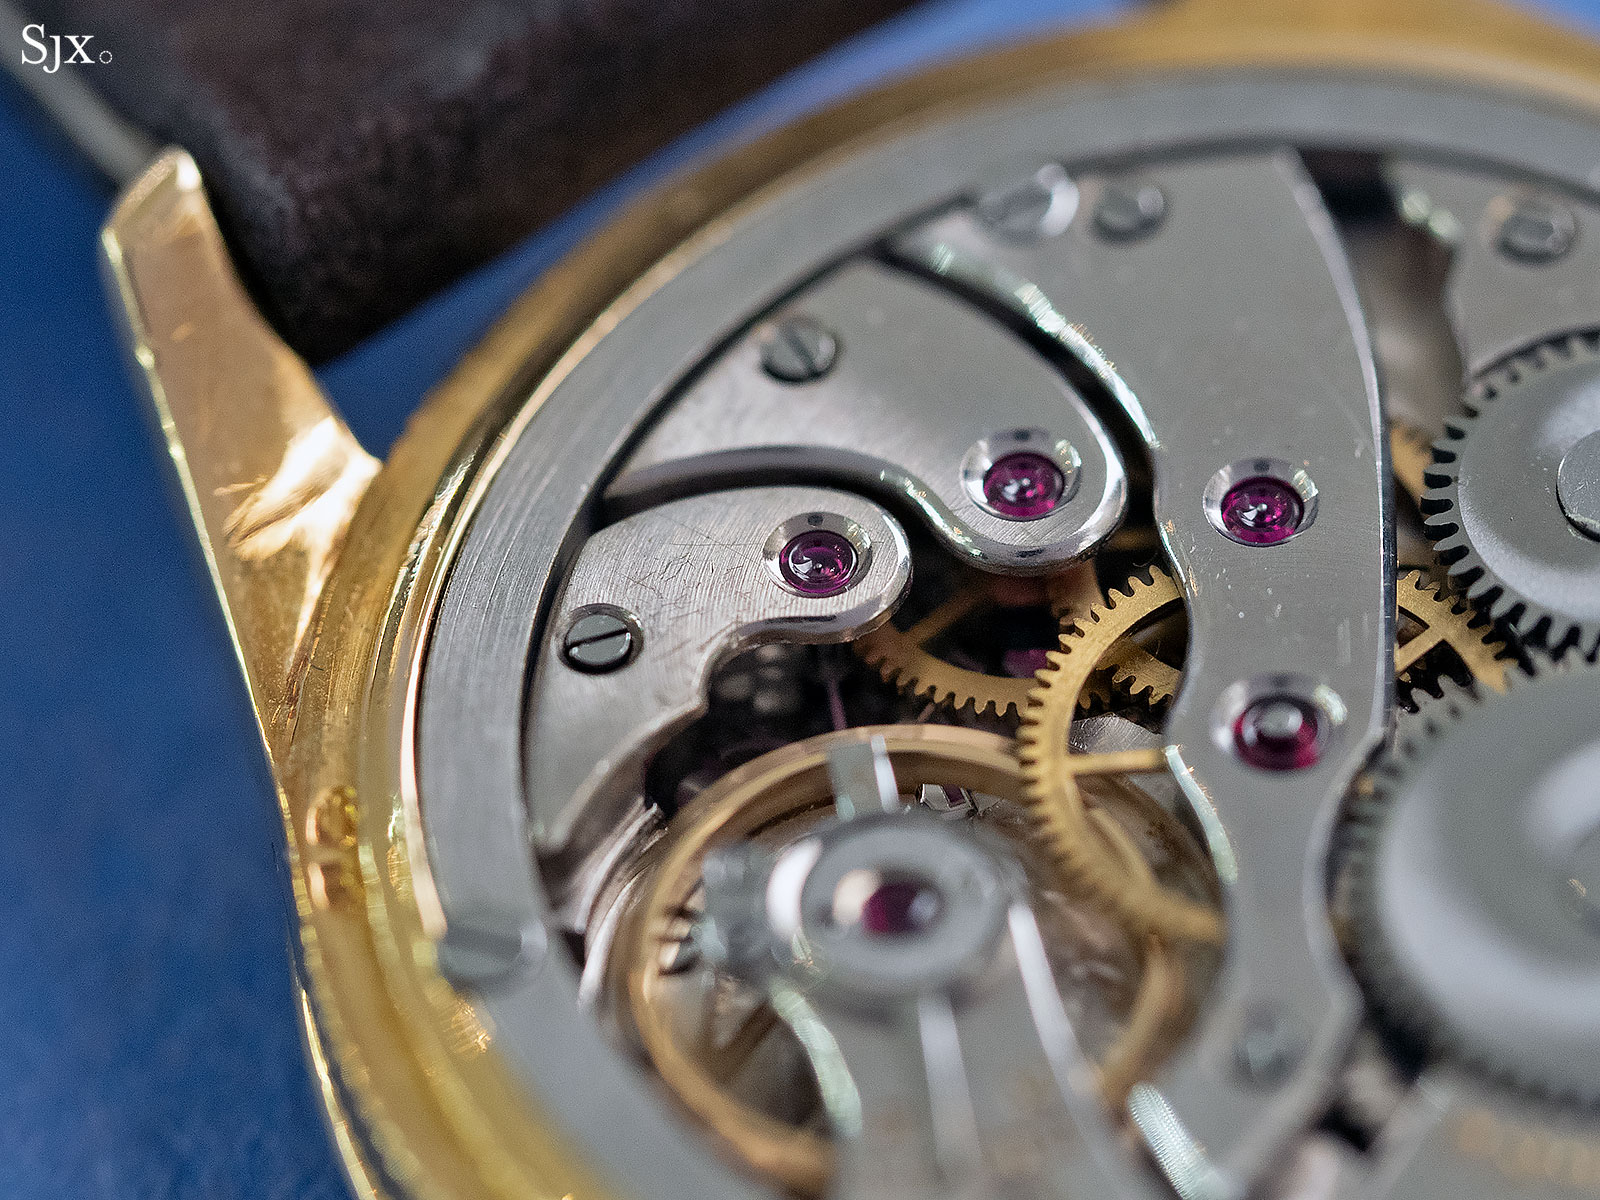 Breguet time-only chronometer 4296-2